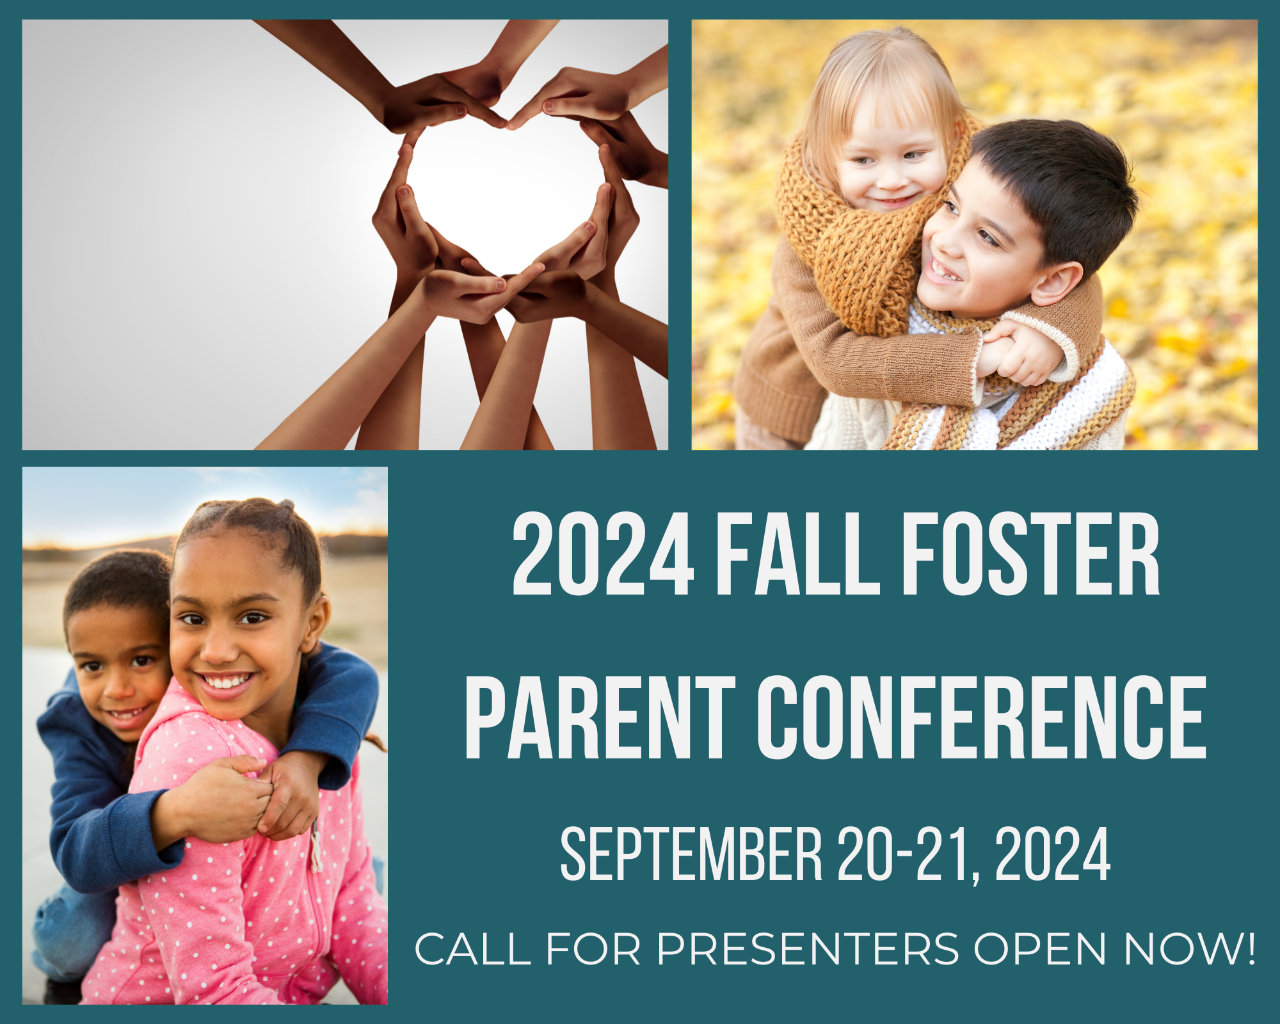 Foster Parent Spring Conference - September 20-21, 2024 - Call for presenters open now